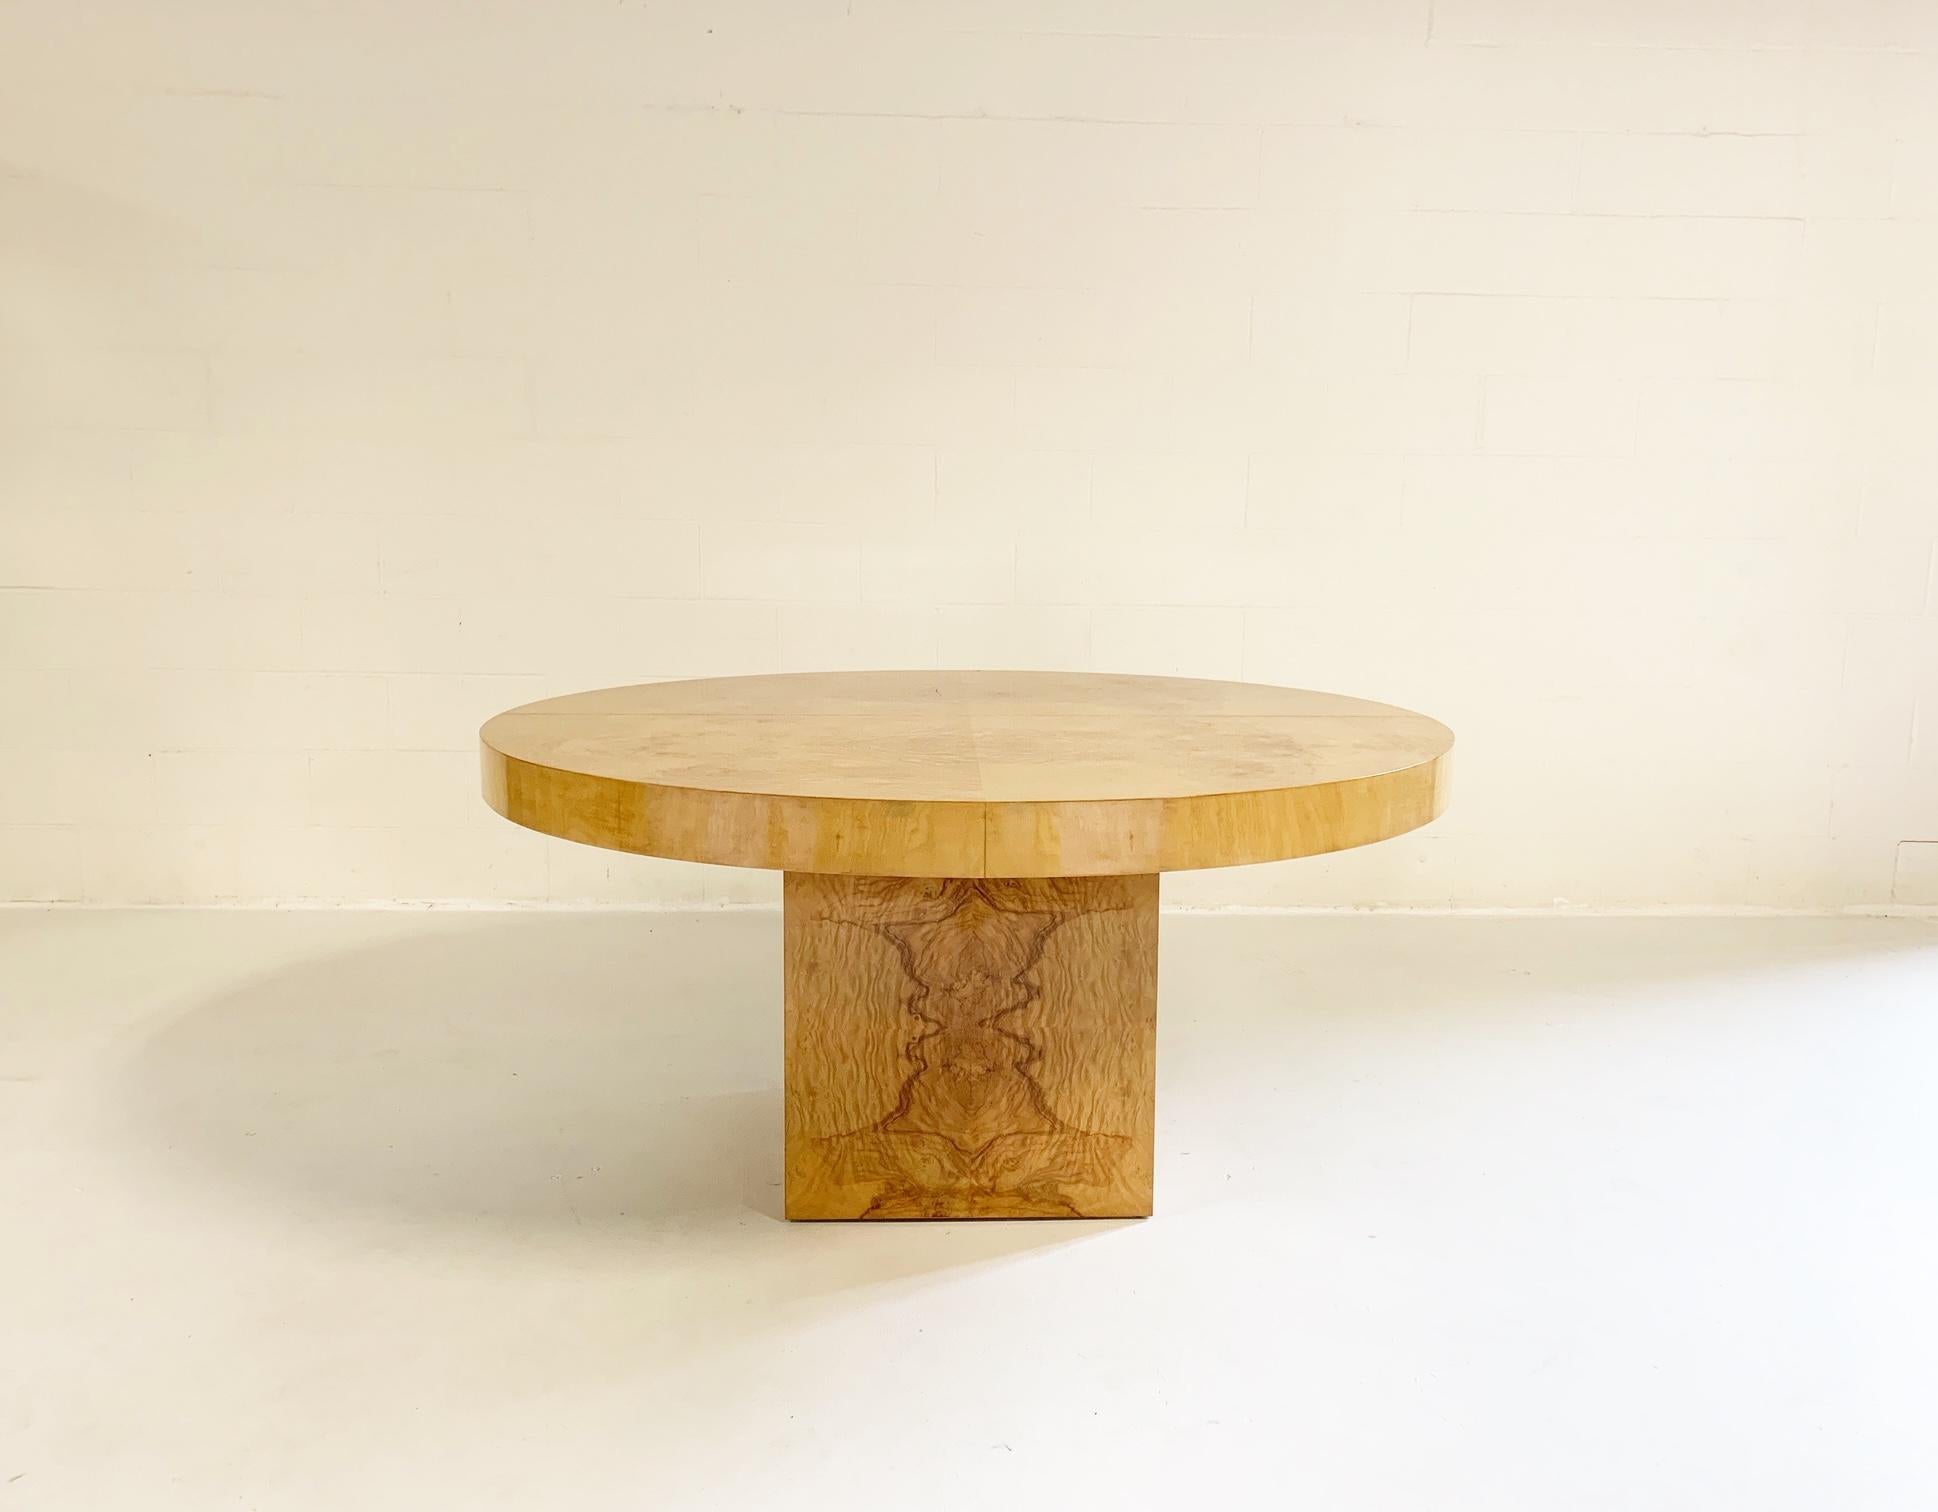 Attributed to Leon Rosen, this dining table is so dynamic. With 2 leaves, it can easily fit 10 dining chairs. Without the 2 leaves, the table squeezes together to form either a nice pedestal dining table for 4 chairs or even a perfect round table